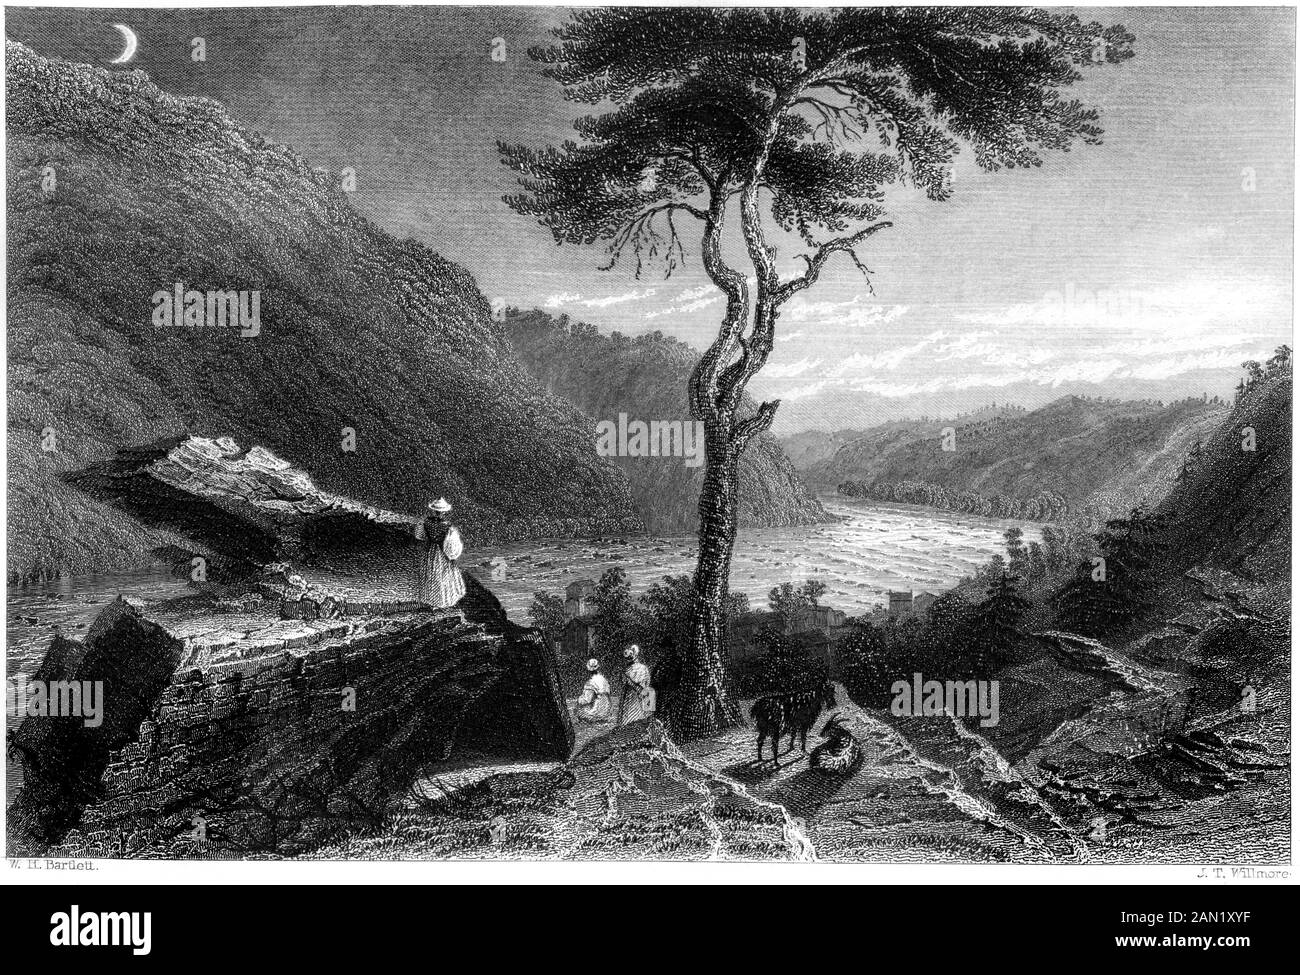 An engraving of The Valley of the Shenandoah, from Jefferson's Rock (Harpers Ferry) scanned at high resolution. from a book printed in 1840. Stock Photo